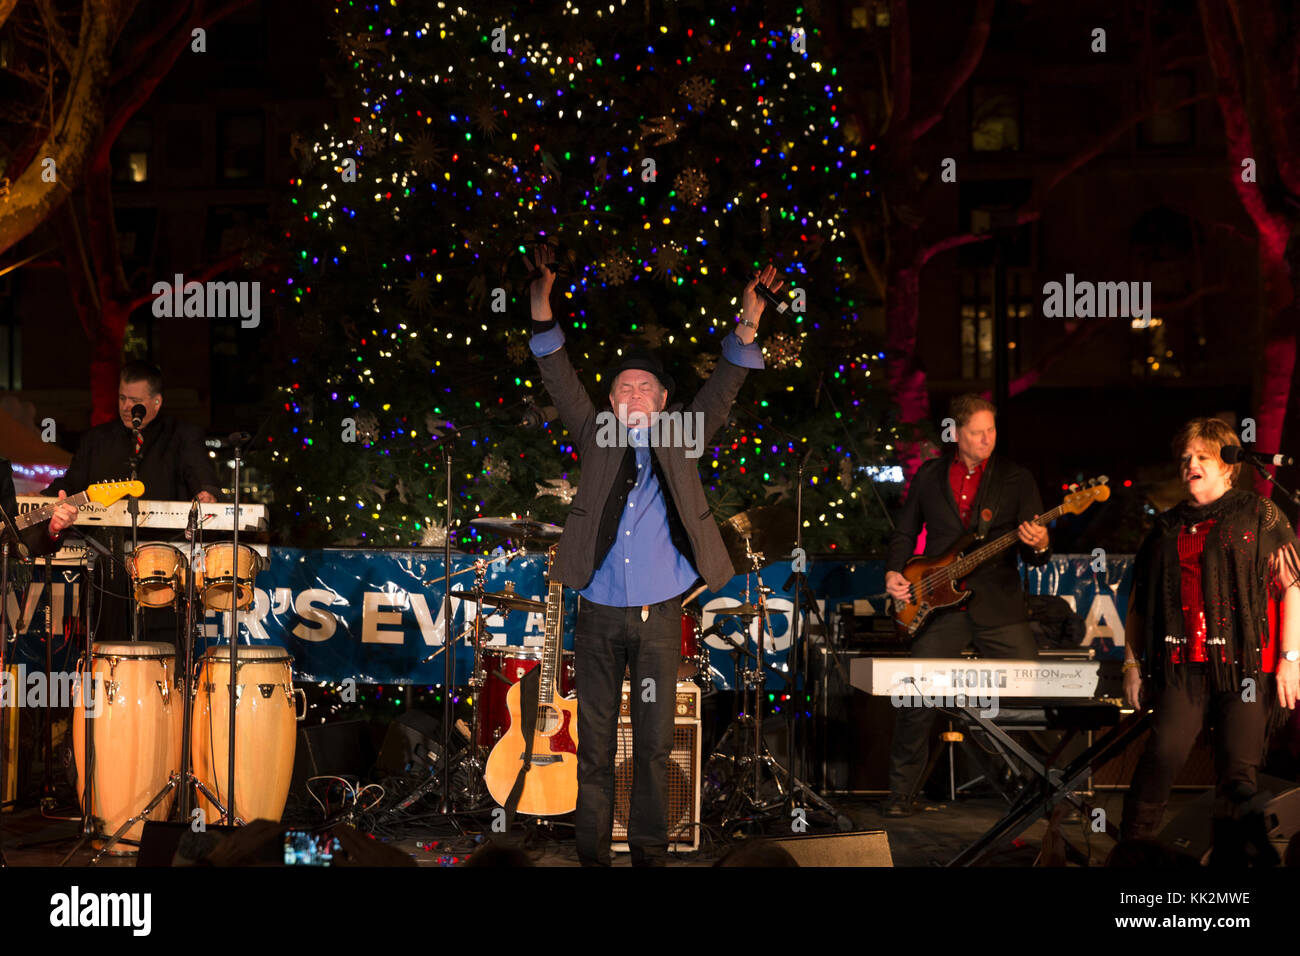 New York, USA. 27th November, 2017. Micky Dolenz and The Monkees band perform during Winter's Eve at Lincoln Center: Tree lighting and food tasting Credit: lev radin/Alamy Live News Stock Photo